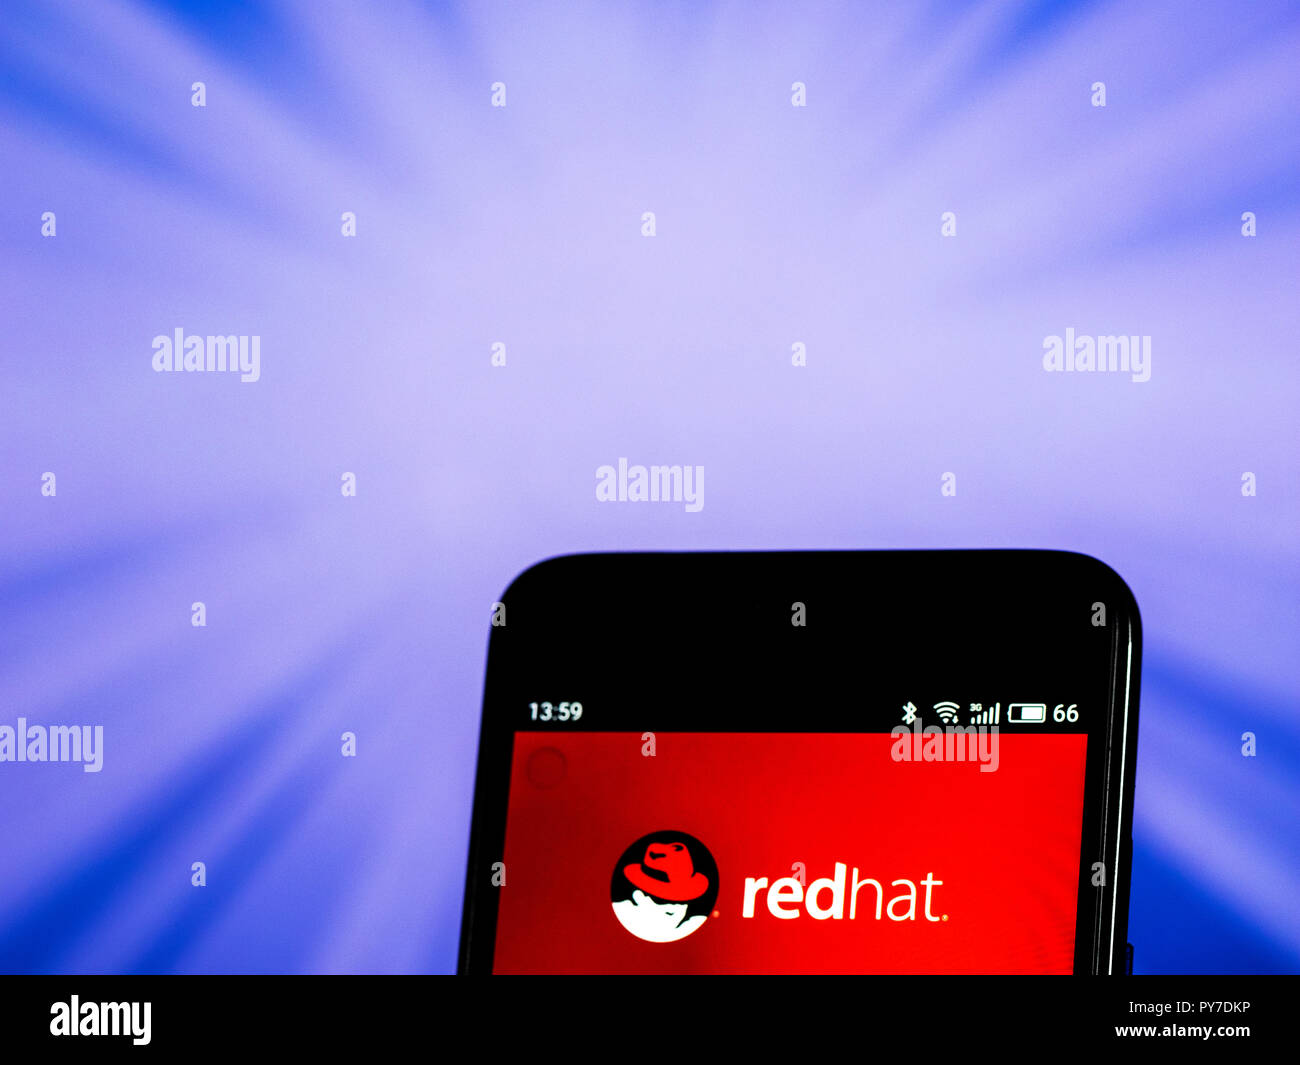 Red Hat  Software company logo seen displayed on smart phone. Red Hat, Inc. is an American multinational software company providing open-source software products to the enterprise community. Stock Photo